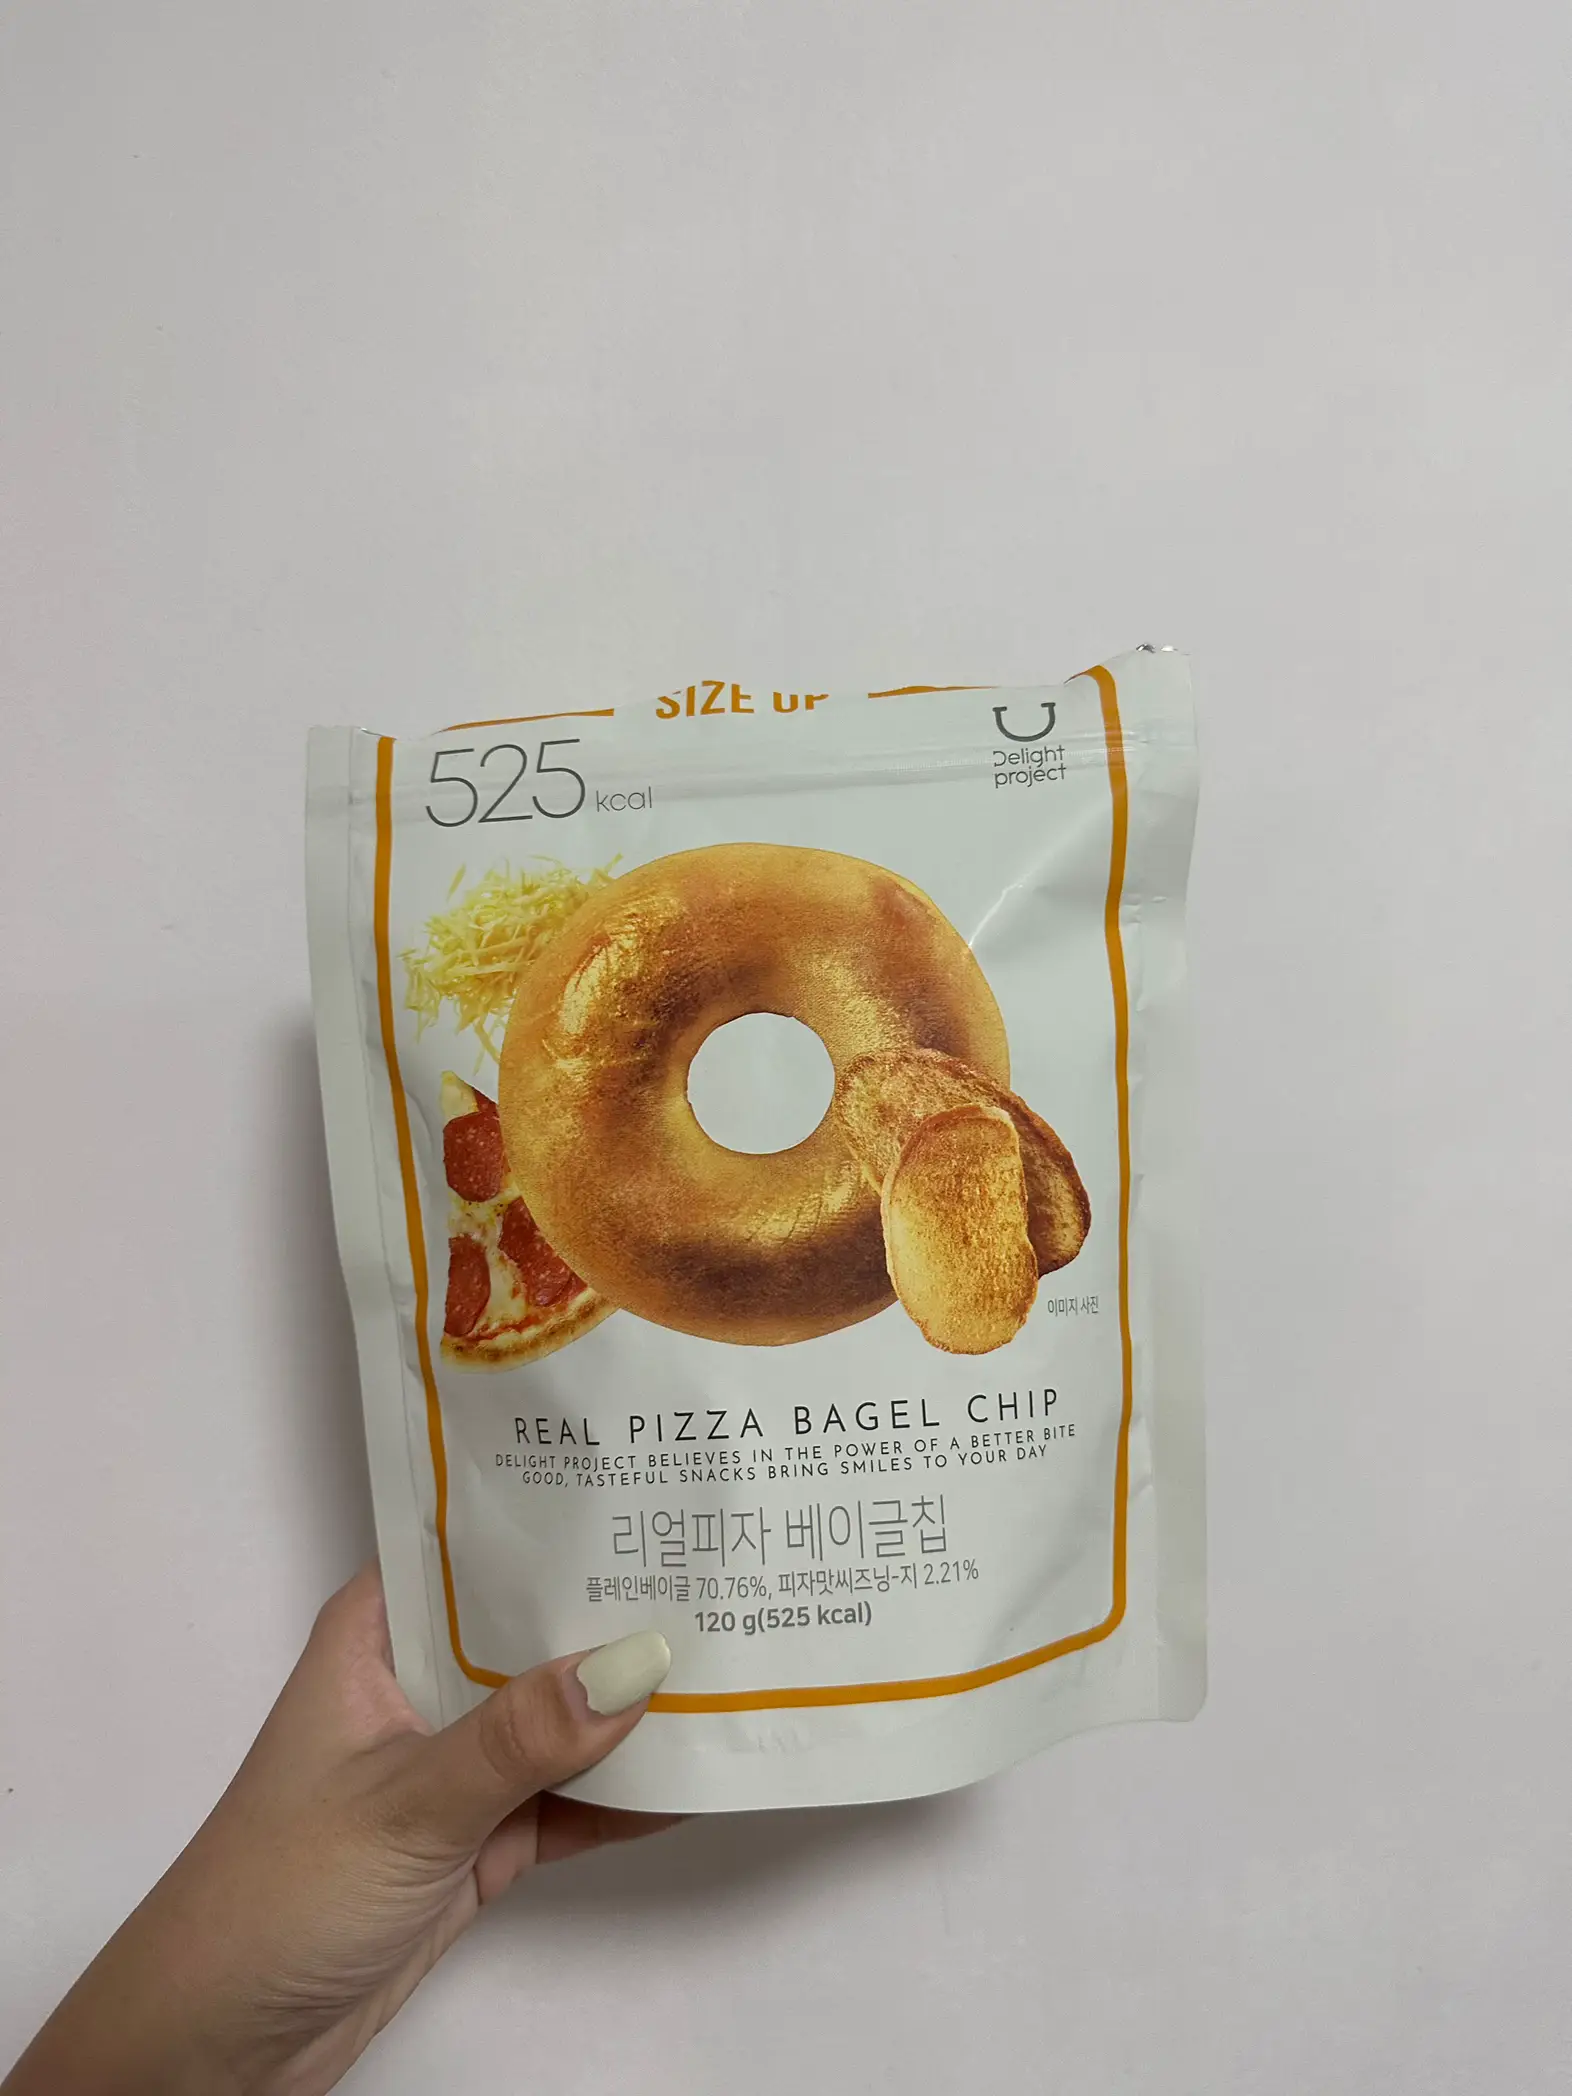 TRYING THE OLIVE YOUNG BAGEL CHIPS 😋🥯's images(1)